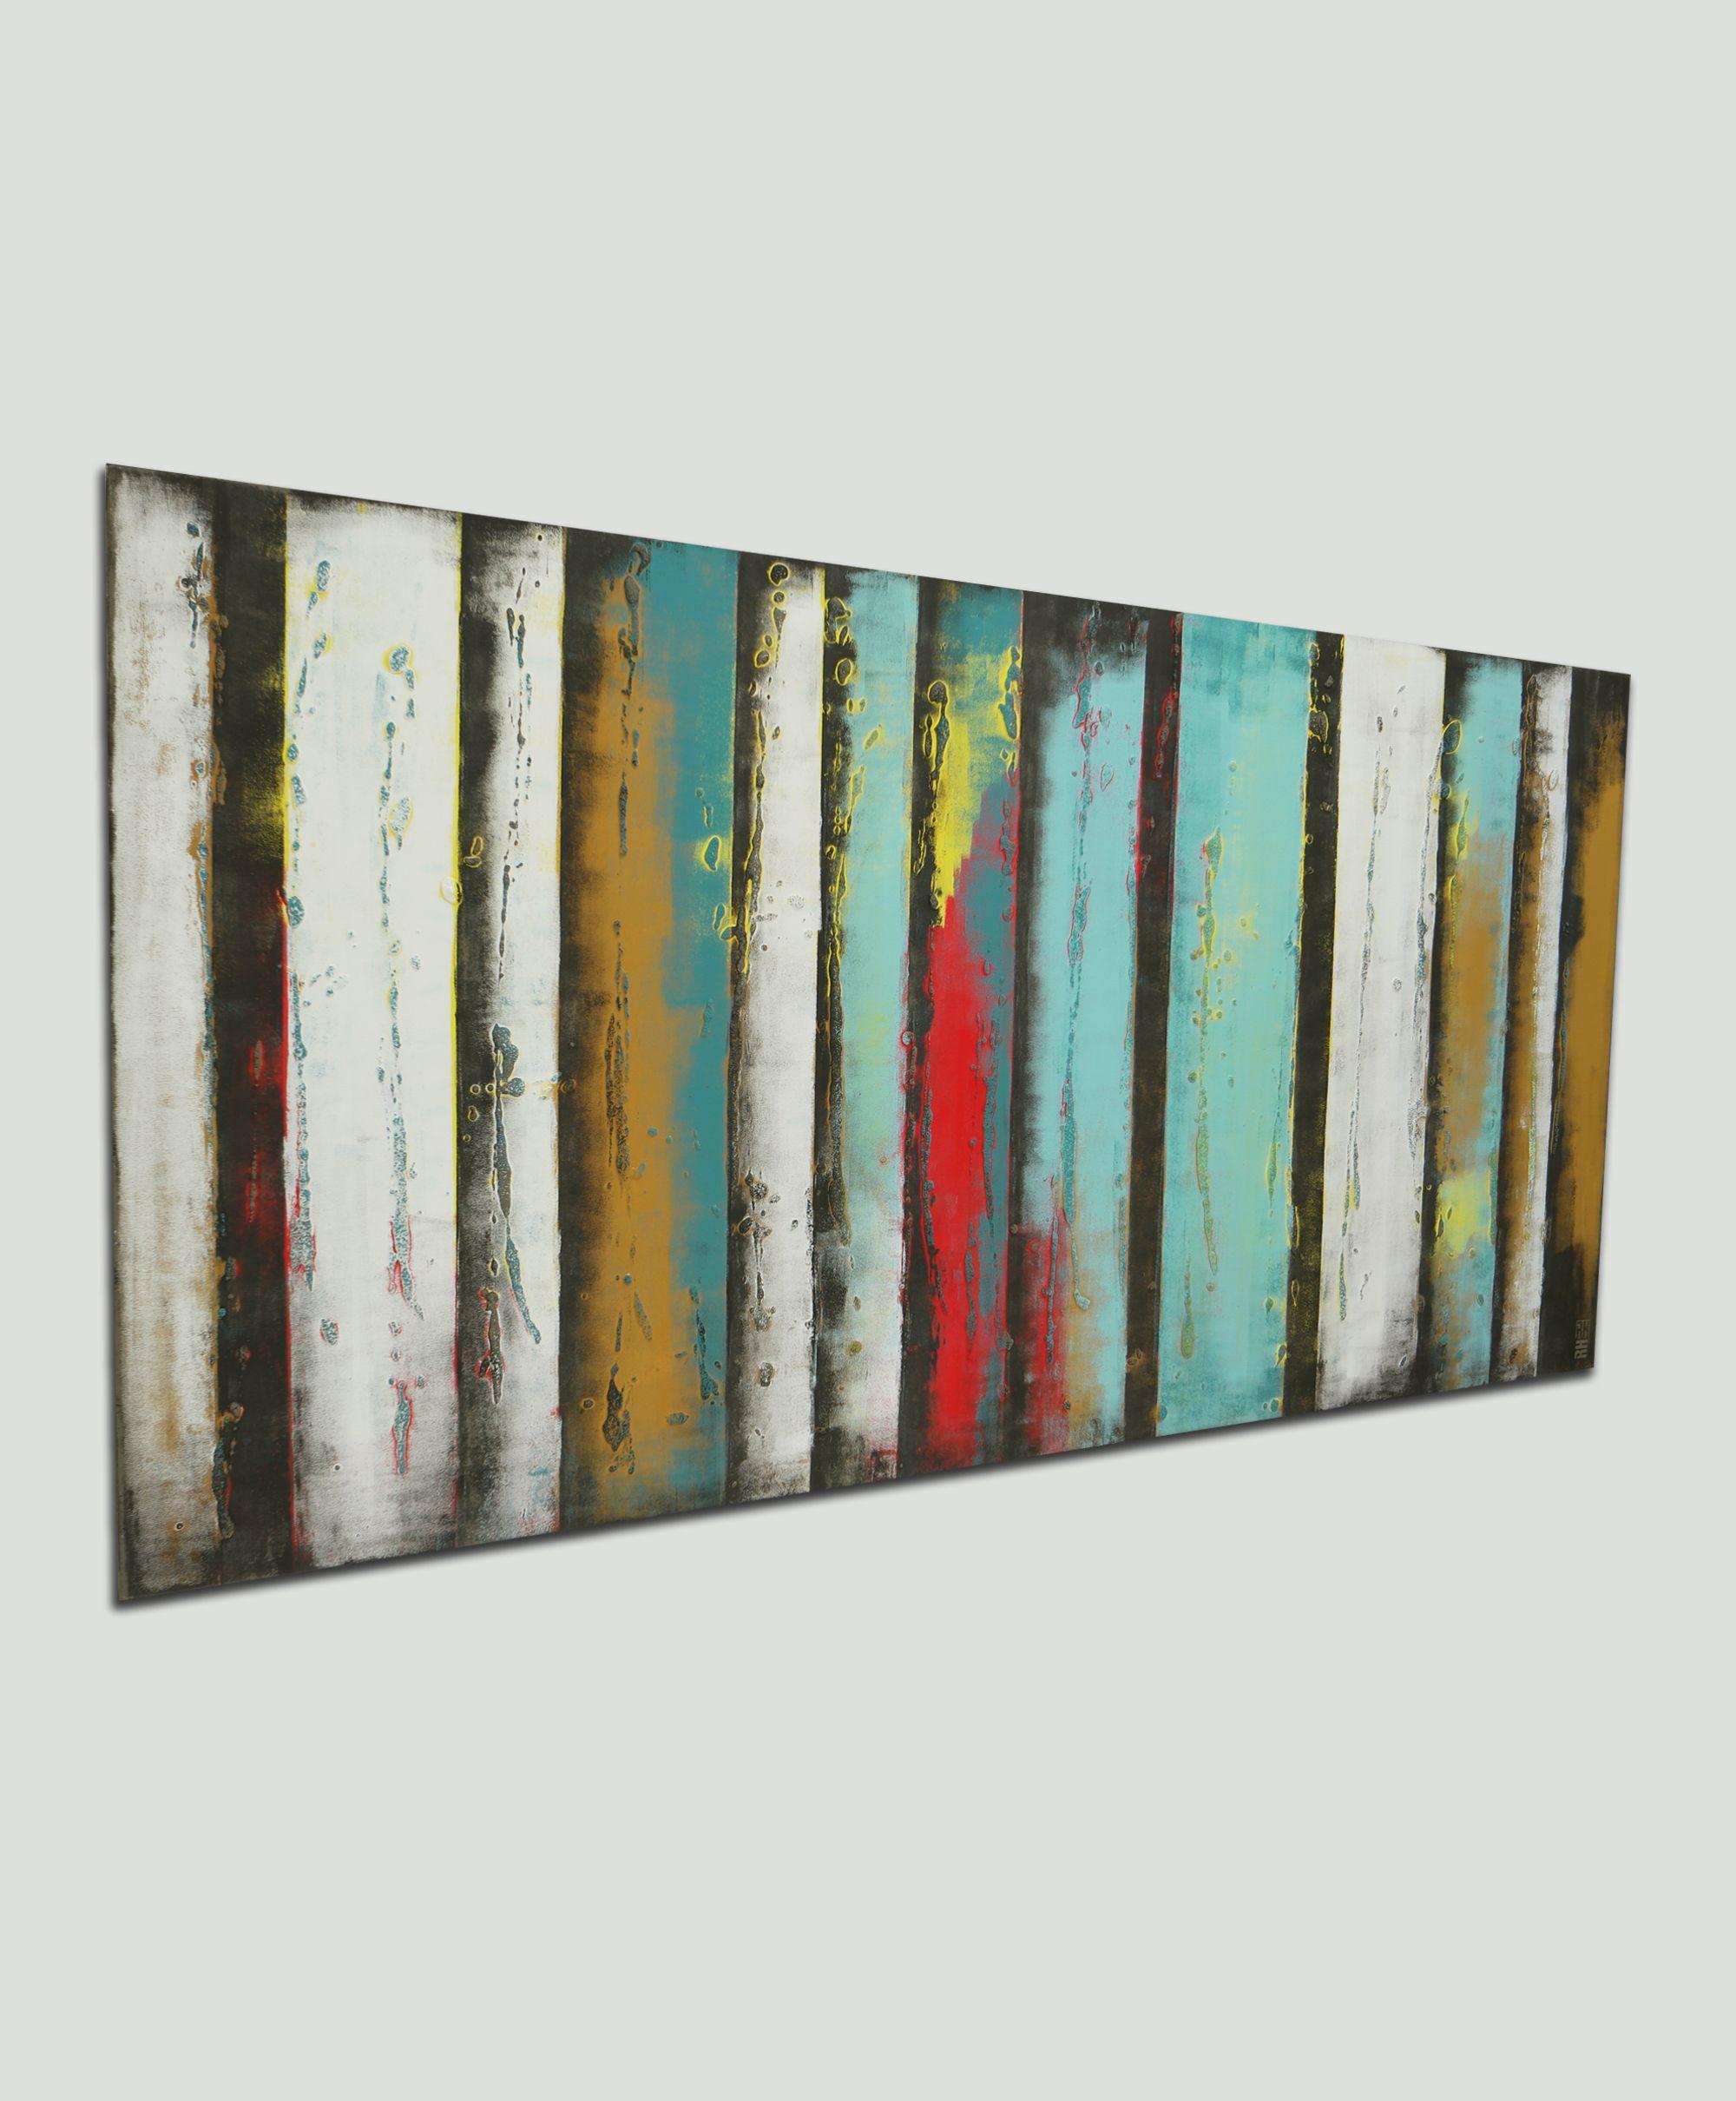 XL Turquoise Panels, Painting, Acrylic on Canvas - Gray Abstract Painting by Ronald Hunter